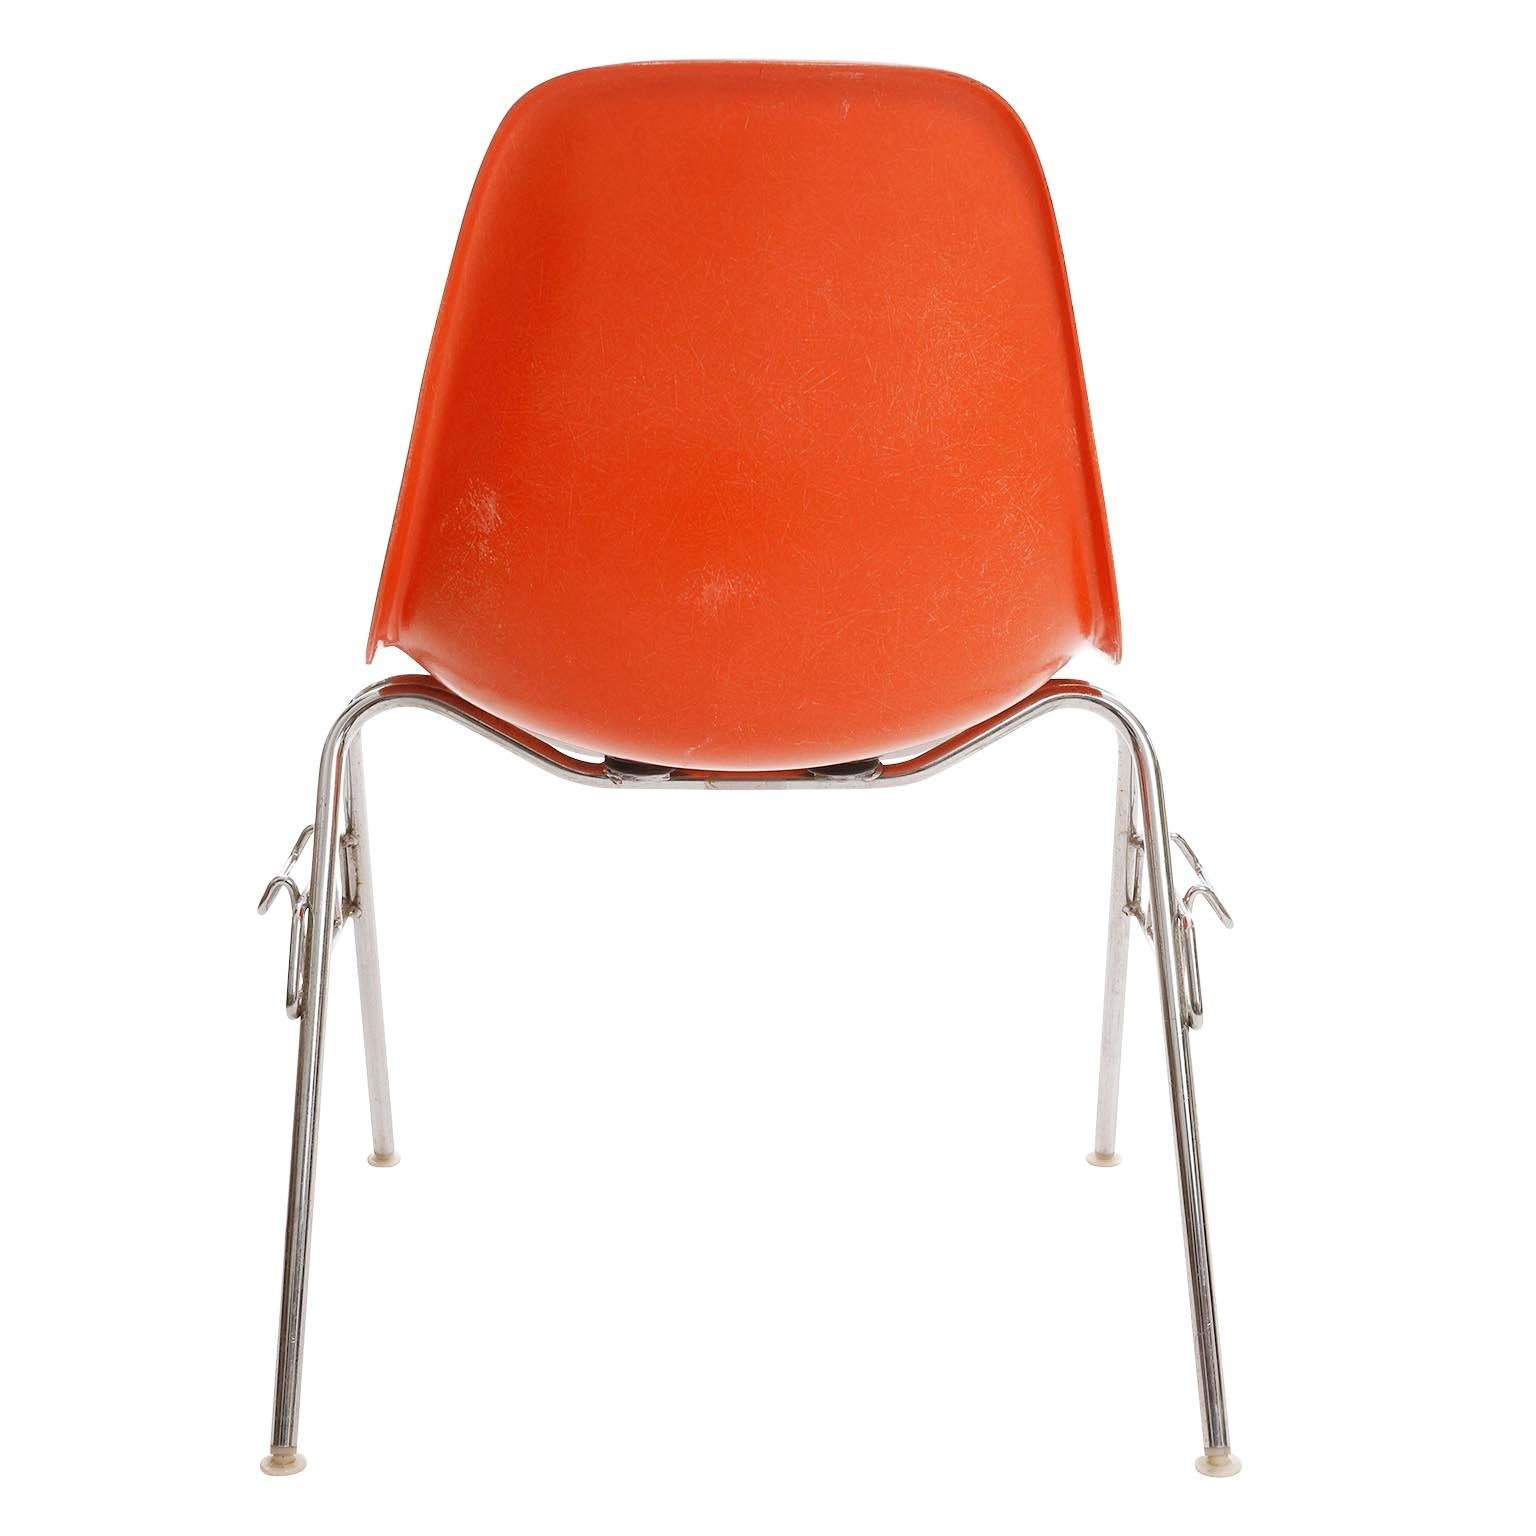 18 DSS Stacking Chairs, Charles & Ray Eames, Herman Miller, Orange Fiberglass In Good Condition For Sale In Hausmannstätten, AT